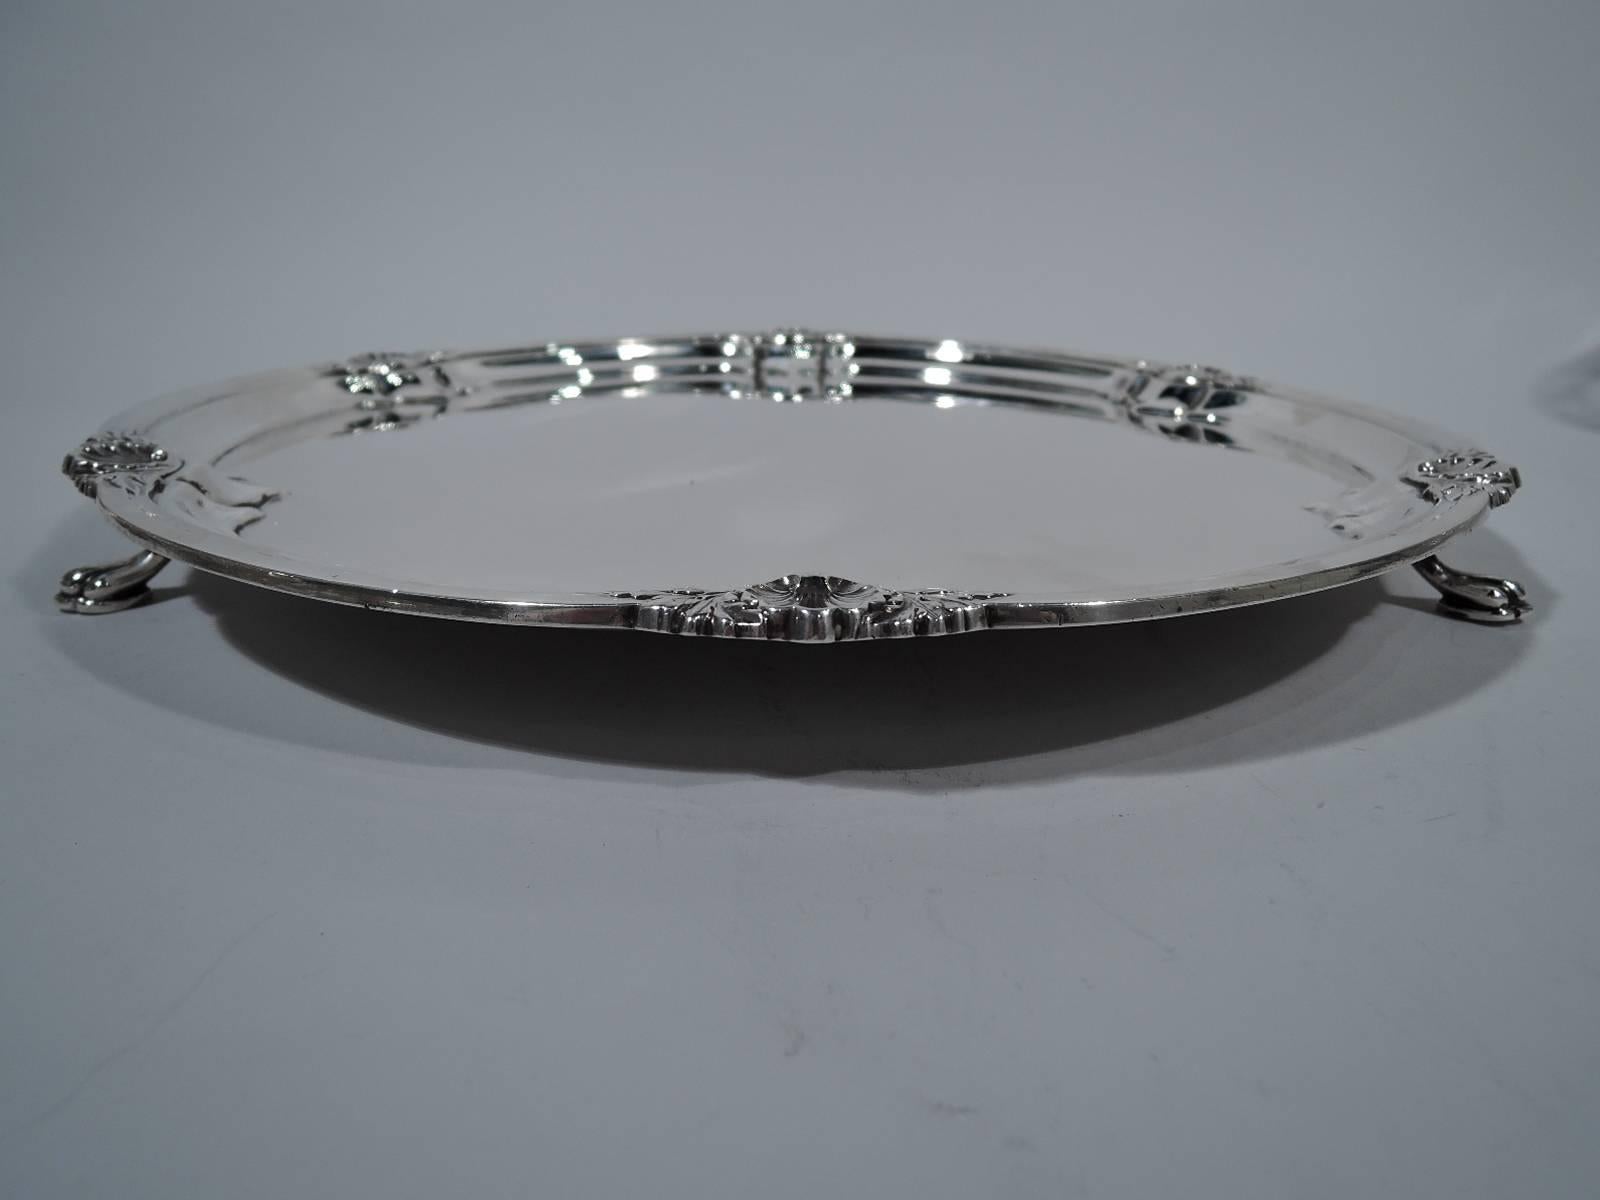 George V sterling silver salver. Made by Cooper Bros & Sons in Sheffield in 1927. Lobed well. Rim molded with applied shells and leaves. Rests on three paw supports. An elegant updating of Georgian motifs. Hallmarked. Weight: 41 troy ounces.